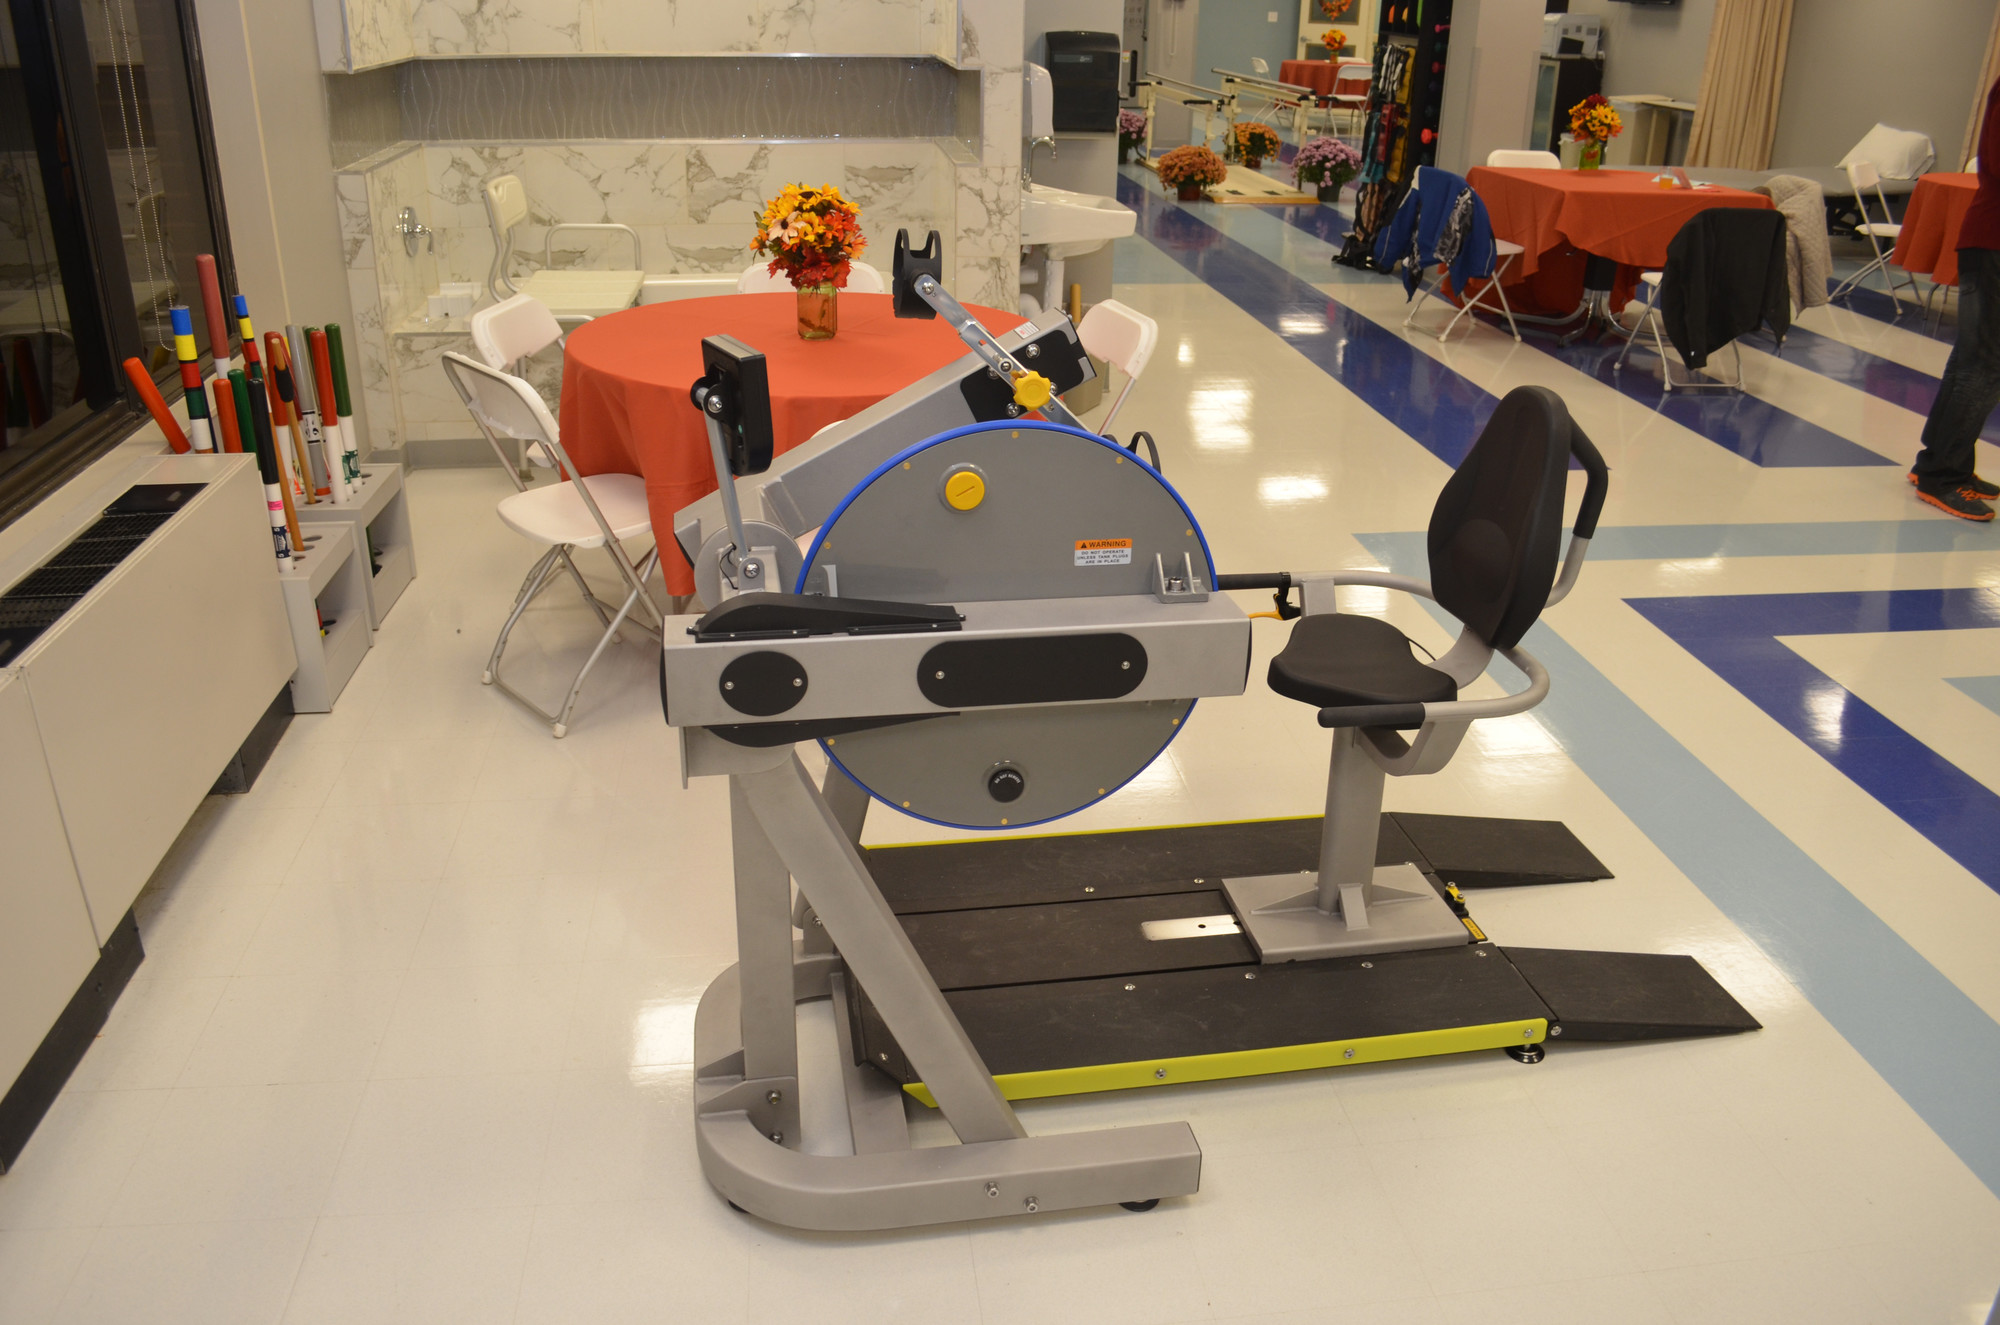 The renovated first floor of the center also contains a gym with exercise equipment to aid in patients’ recovery.